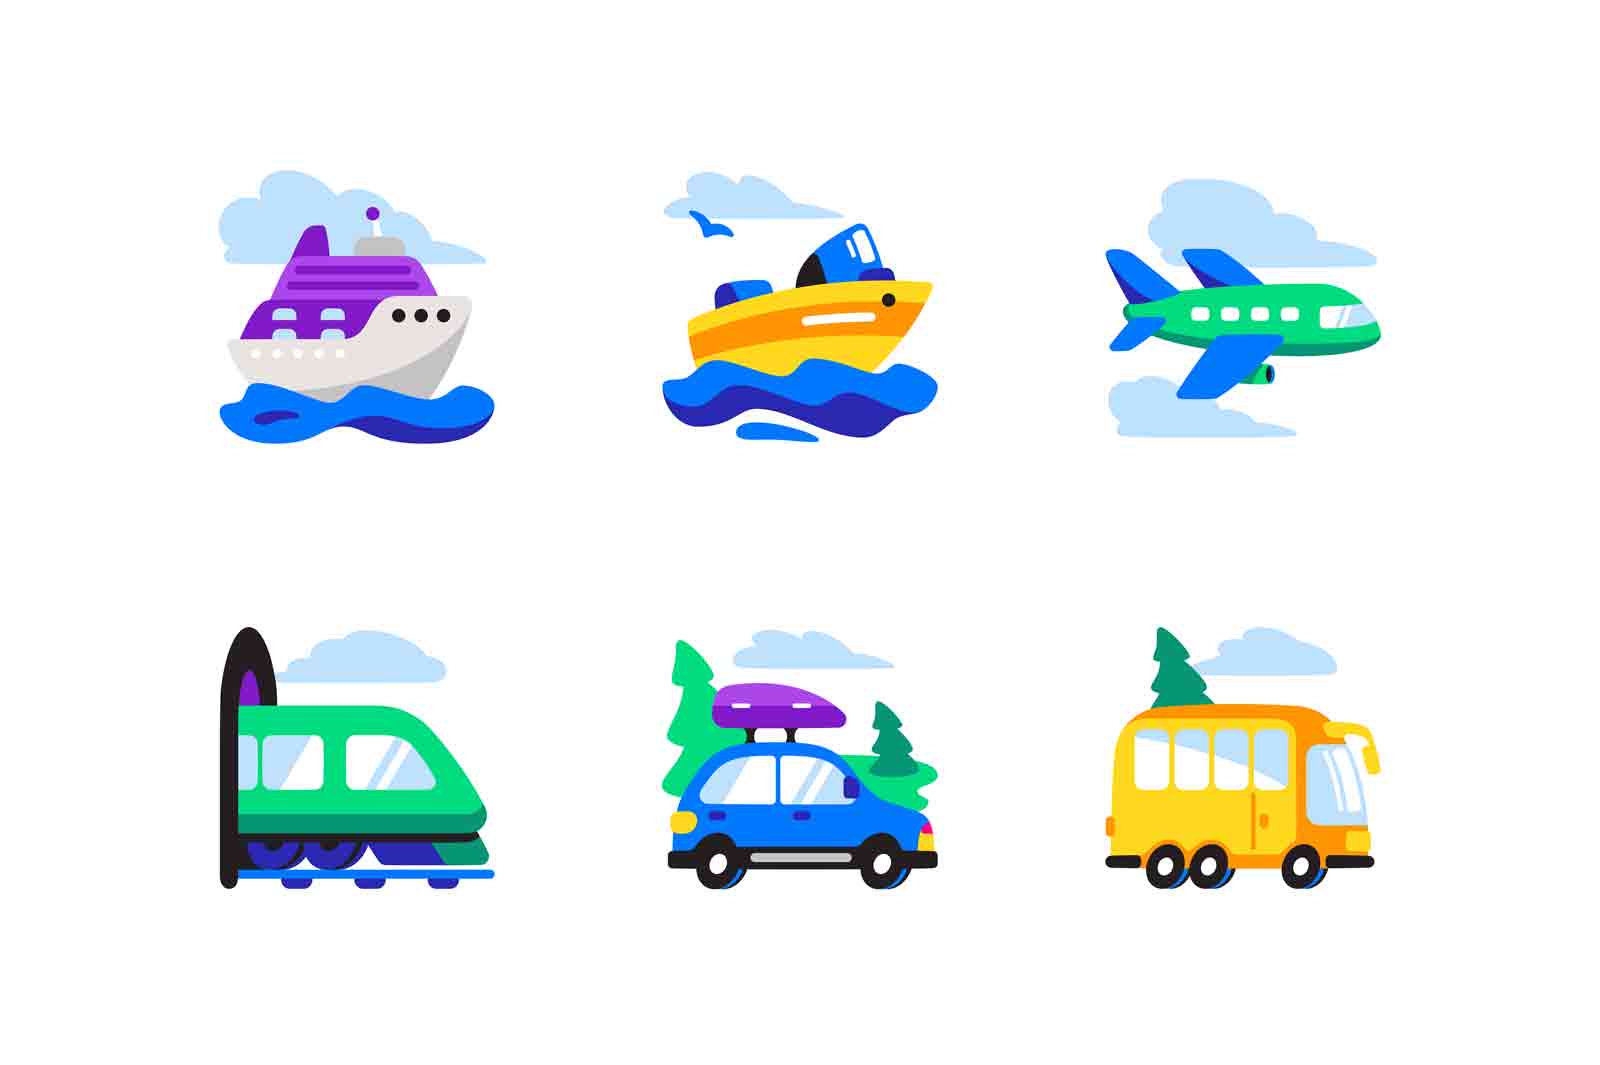 Mode of travelling transport flat icon set vector illustration. Public transport, travelling by cruise ship, airplane, train, car, or bus flat concept